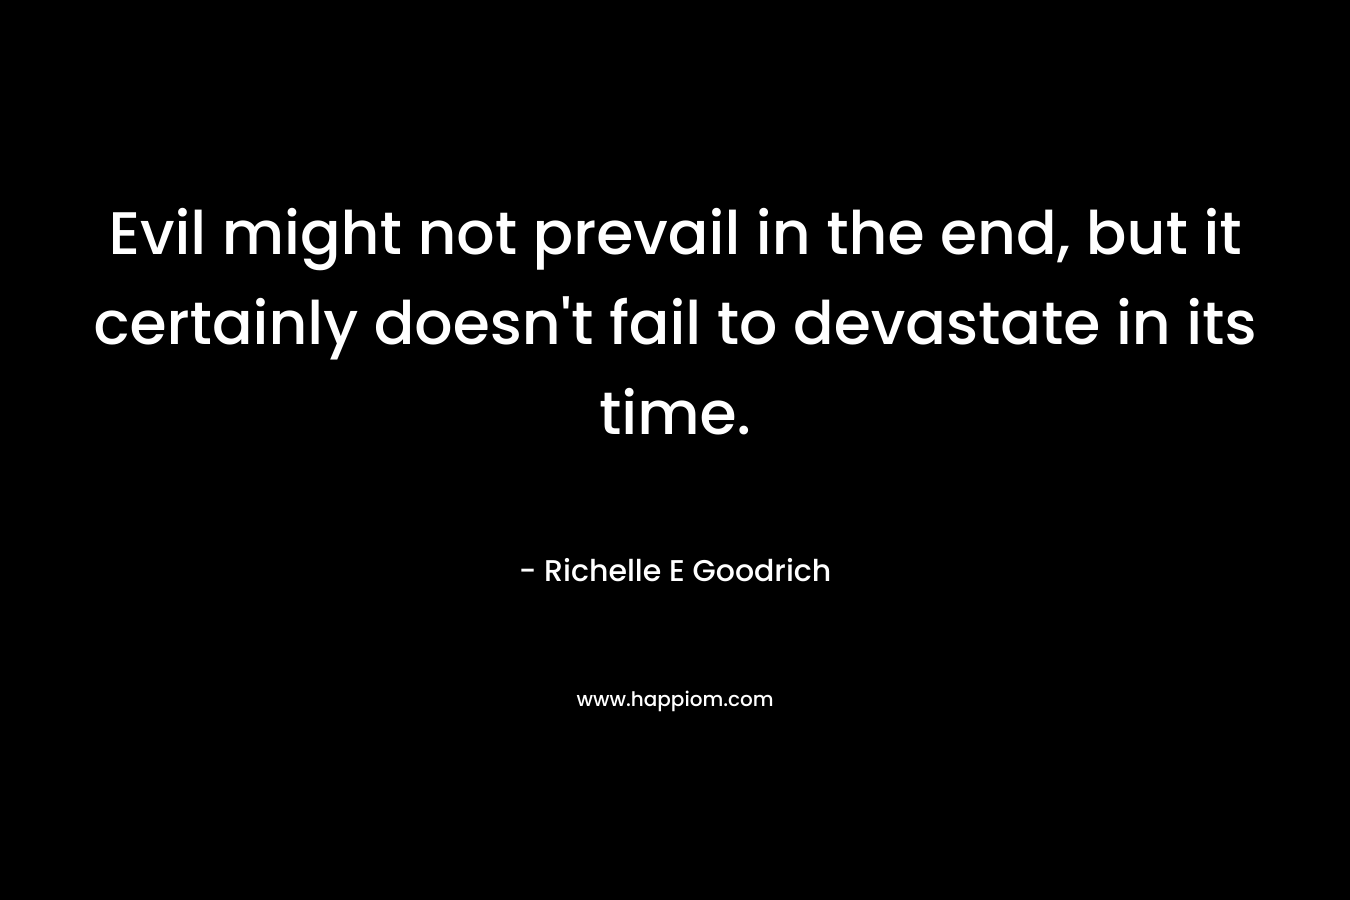 Evil might not prevail in the end, but it certainly doesn’t fail to devastate in its time. – Richelle E Goodrich